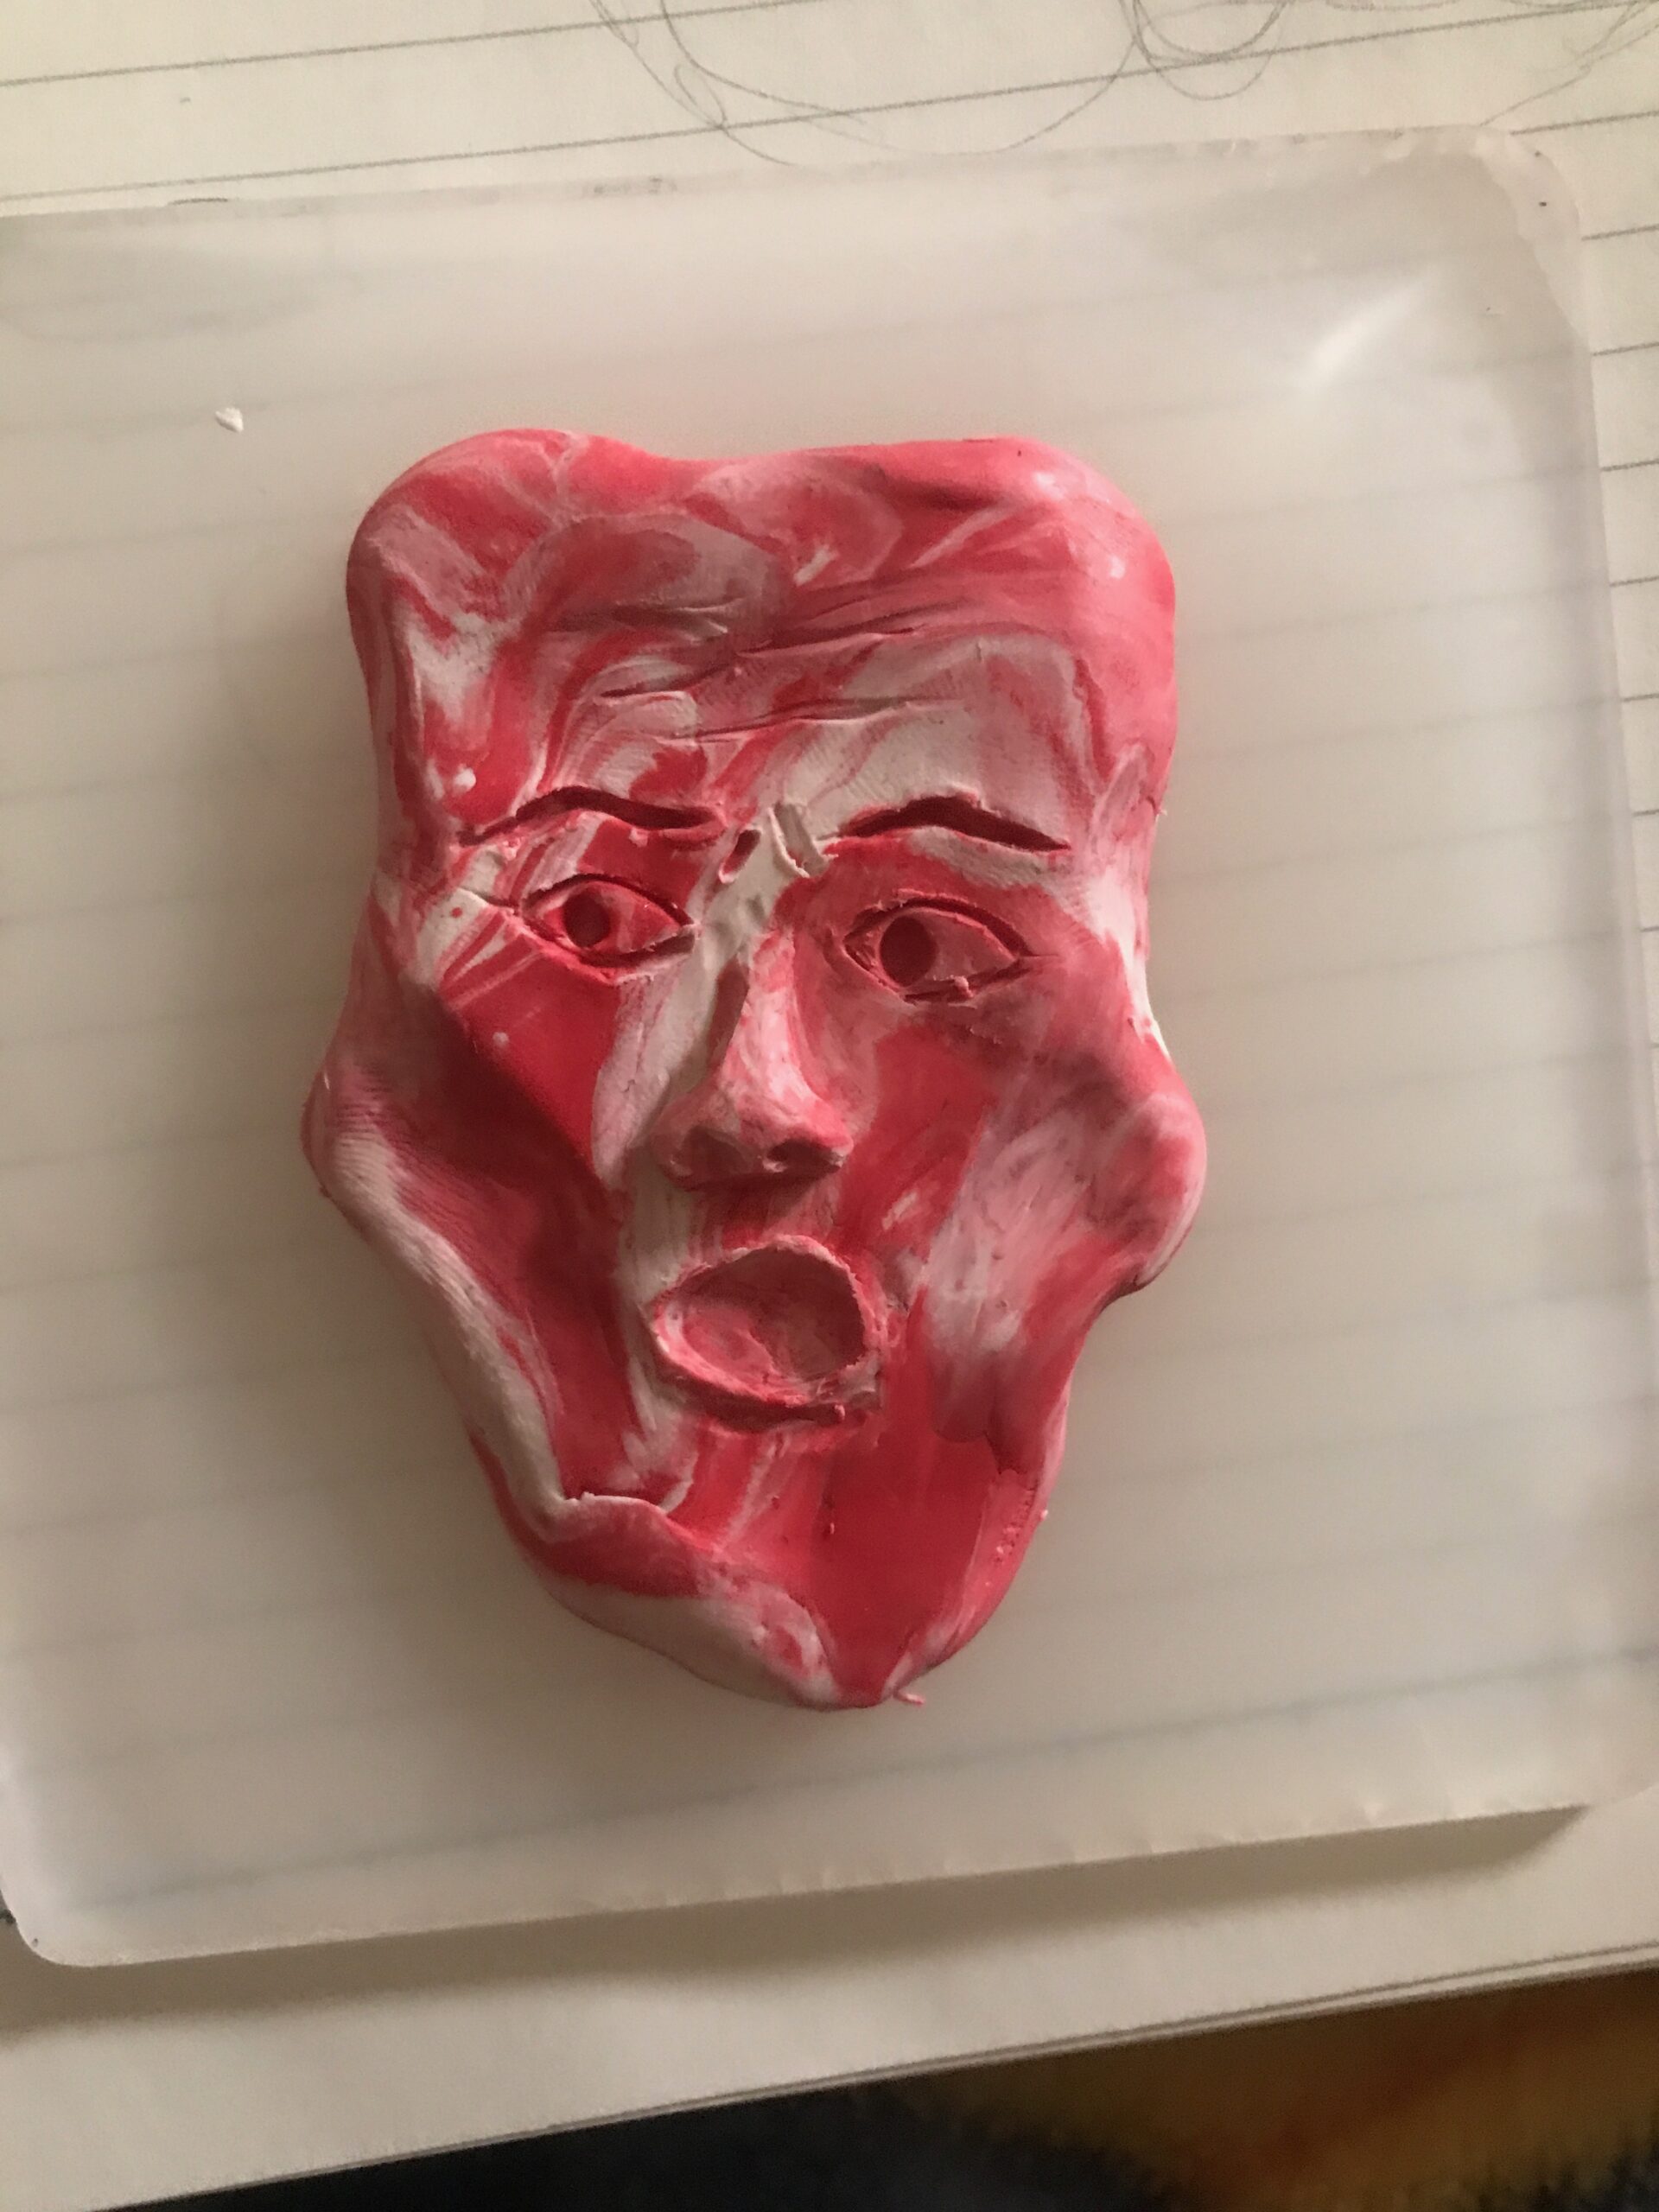 A red and white marbled clay face with high cheekbones, a flat and square top of the head, and a wide open mouth like they are shocked